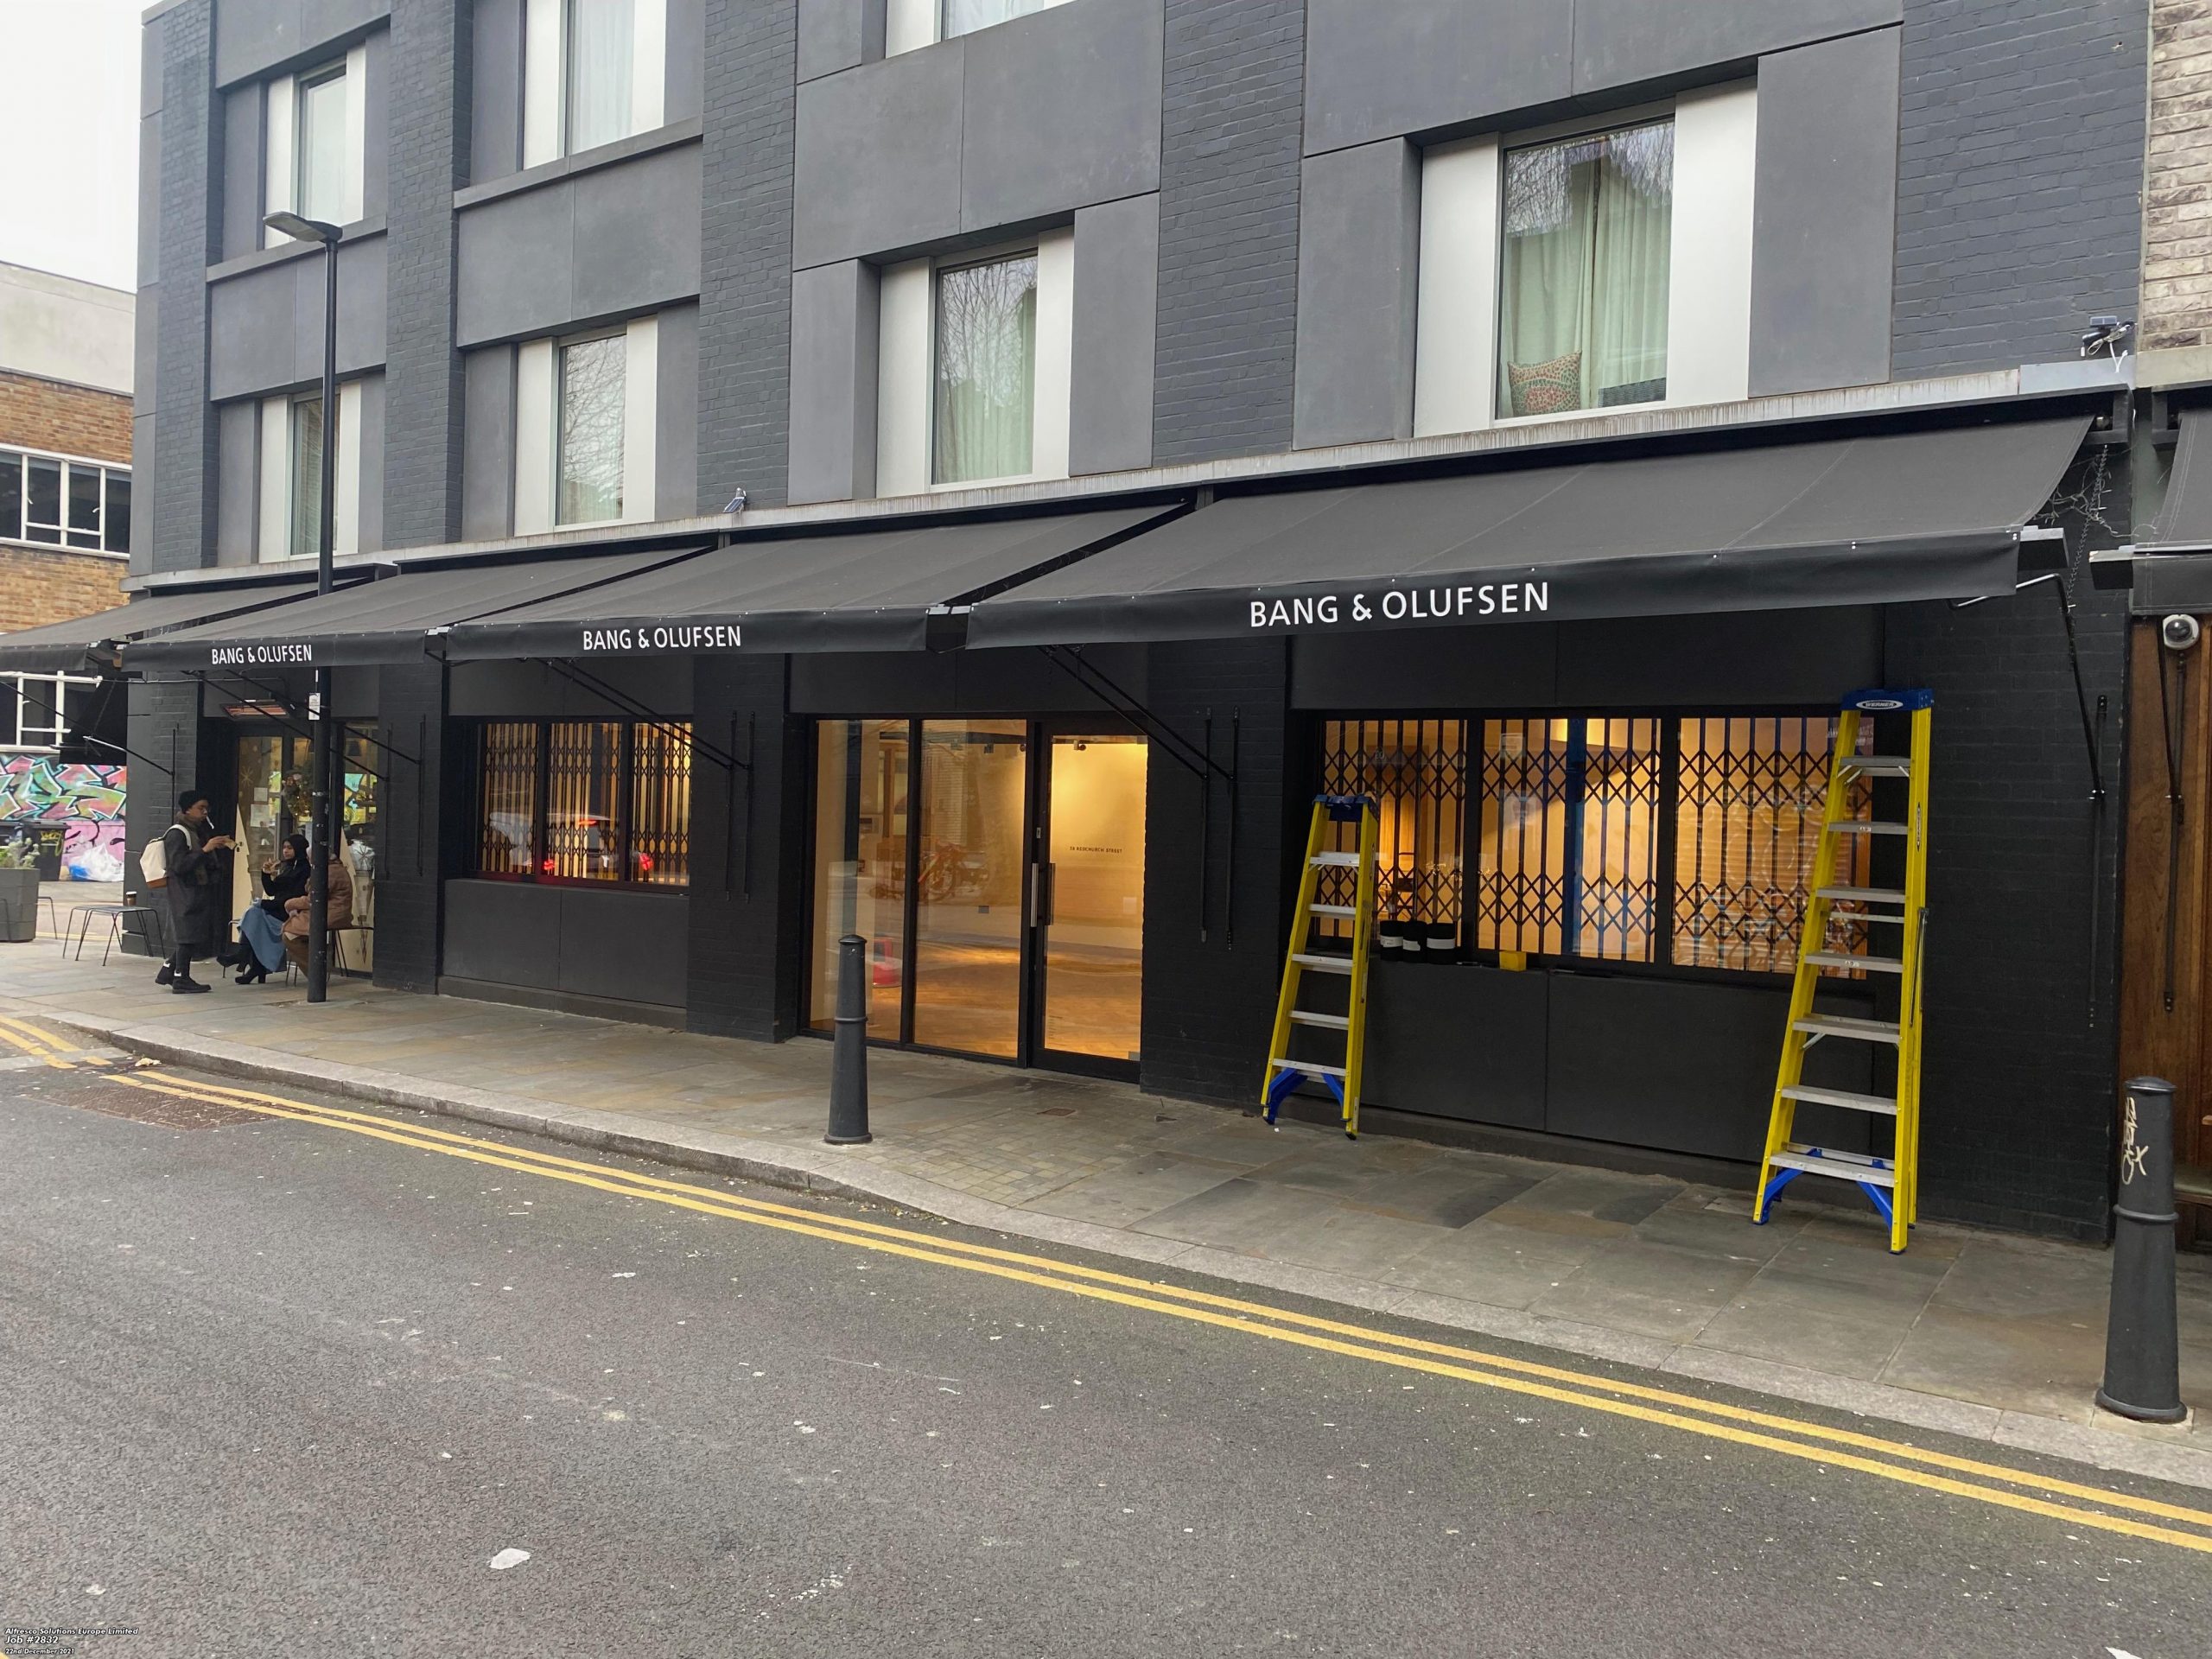 Custom Branded Traditional Awnings in Shoreditch Central London